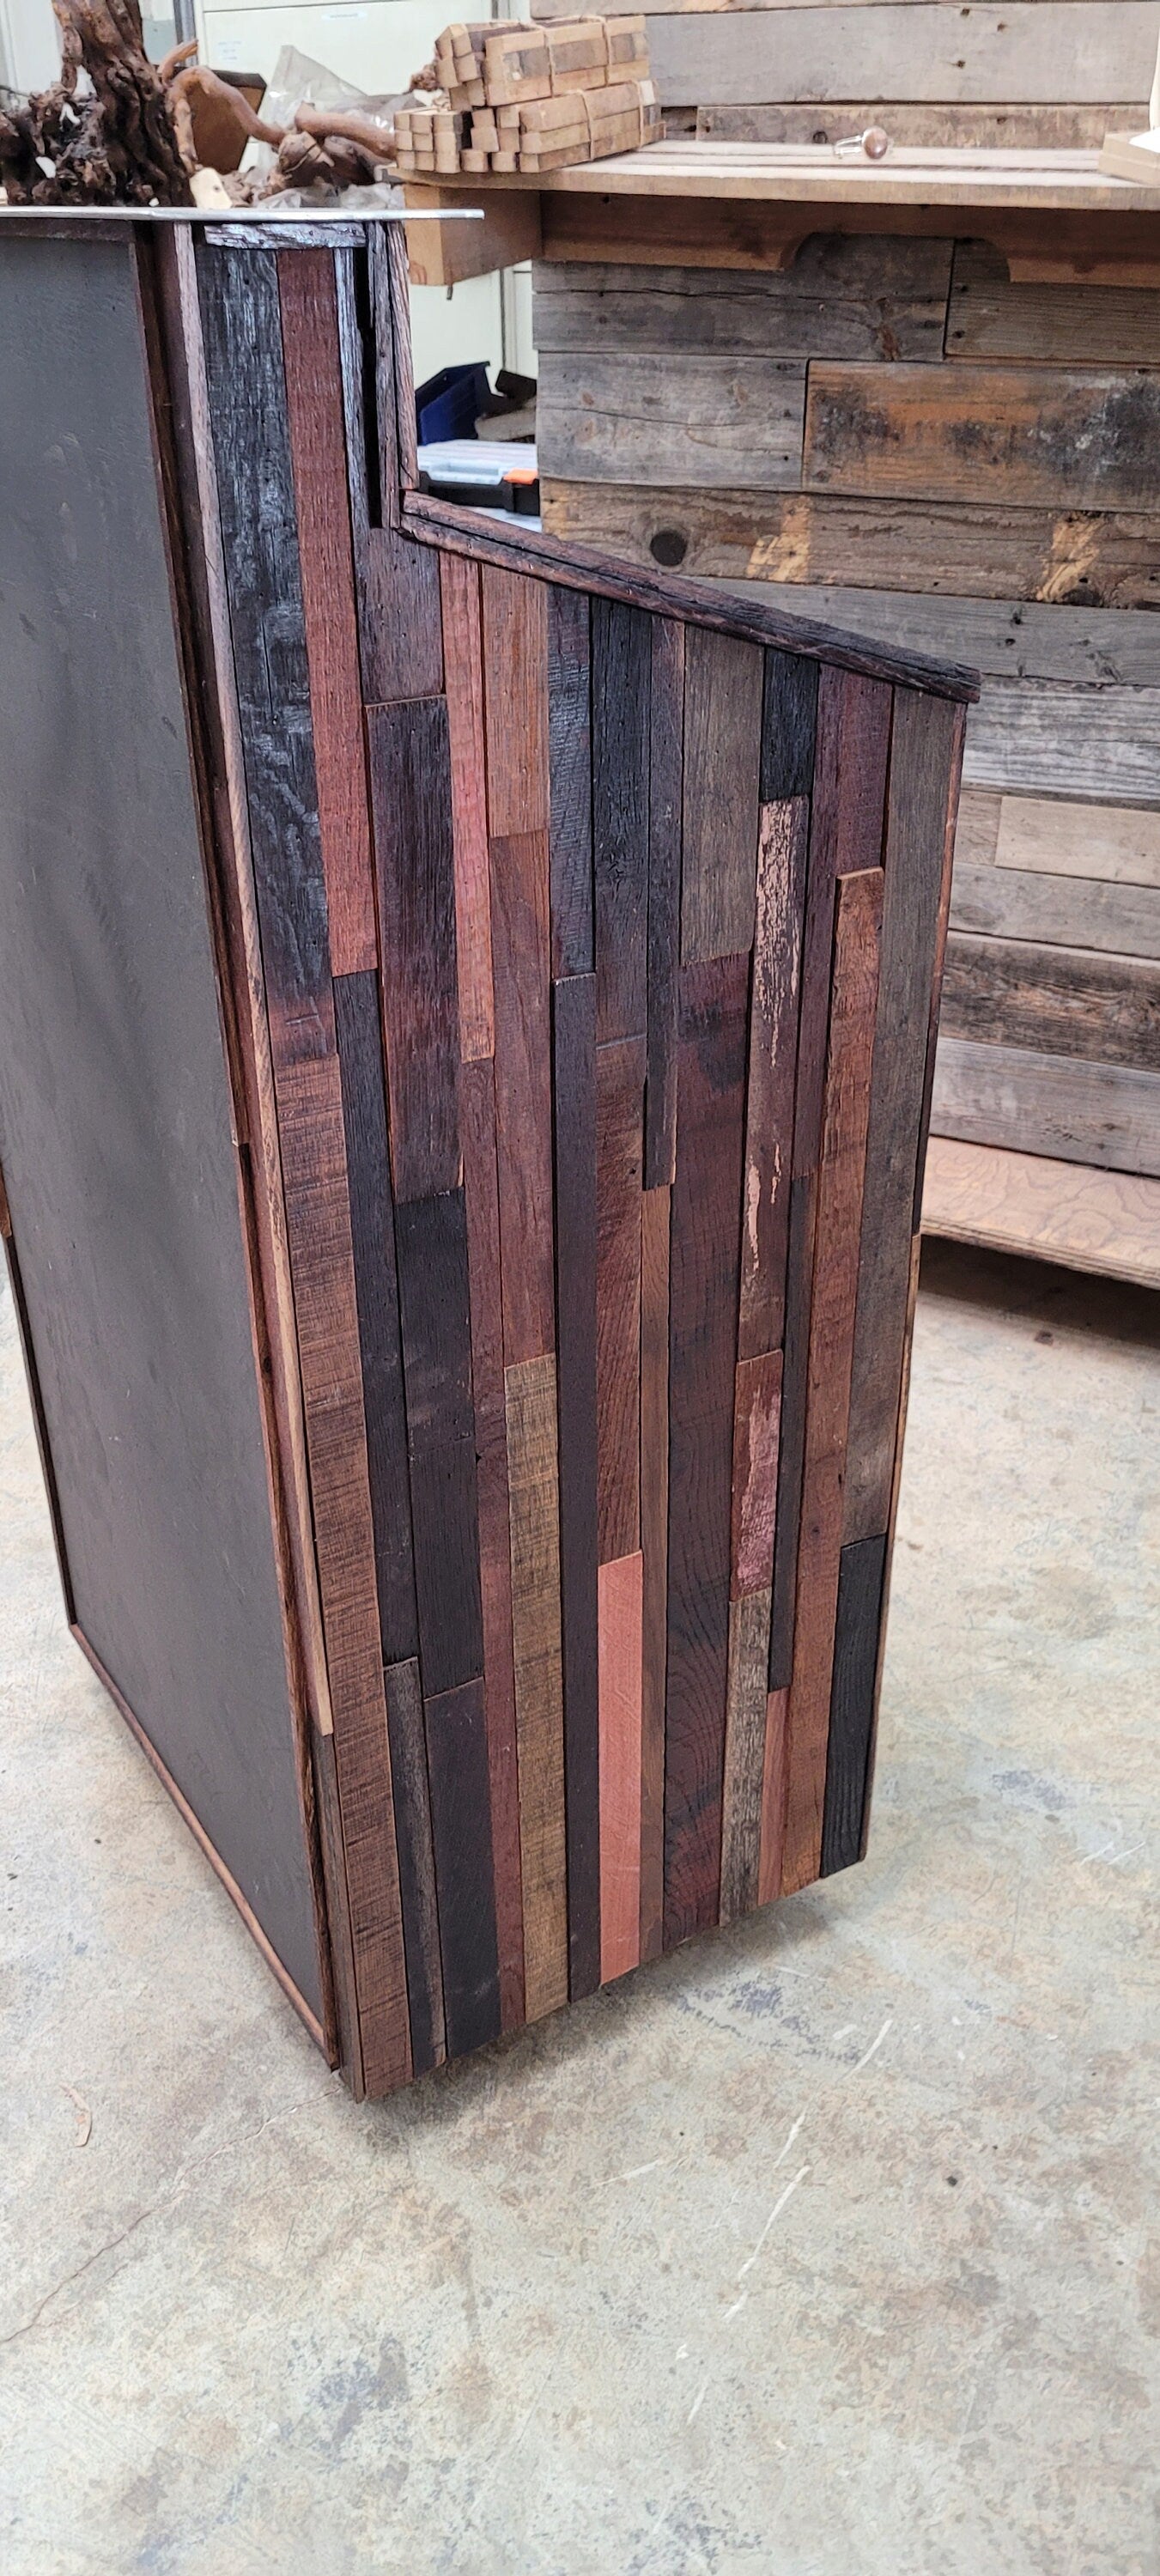 Hostess Stand Podium POS - Terono - Made from retired California wine barrels. 100% Recycled!